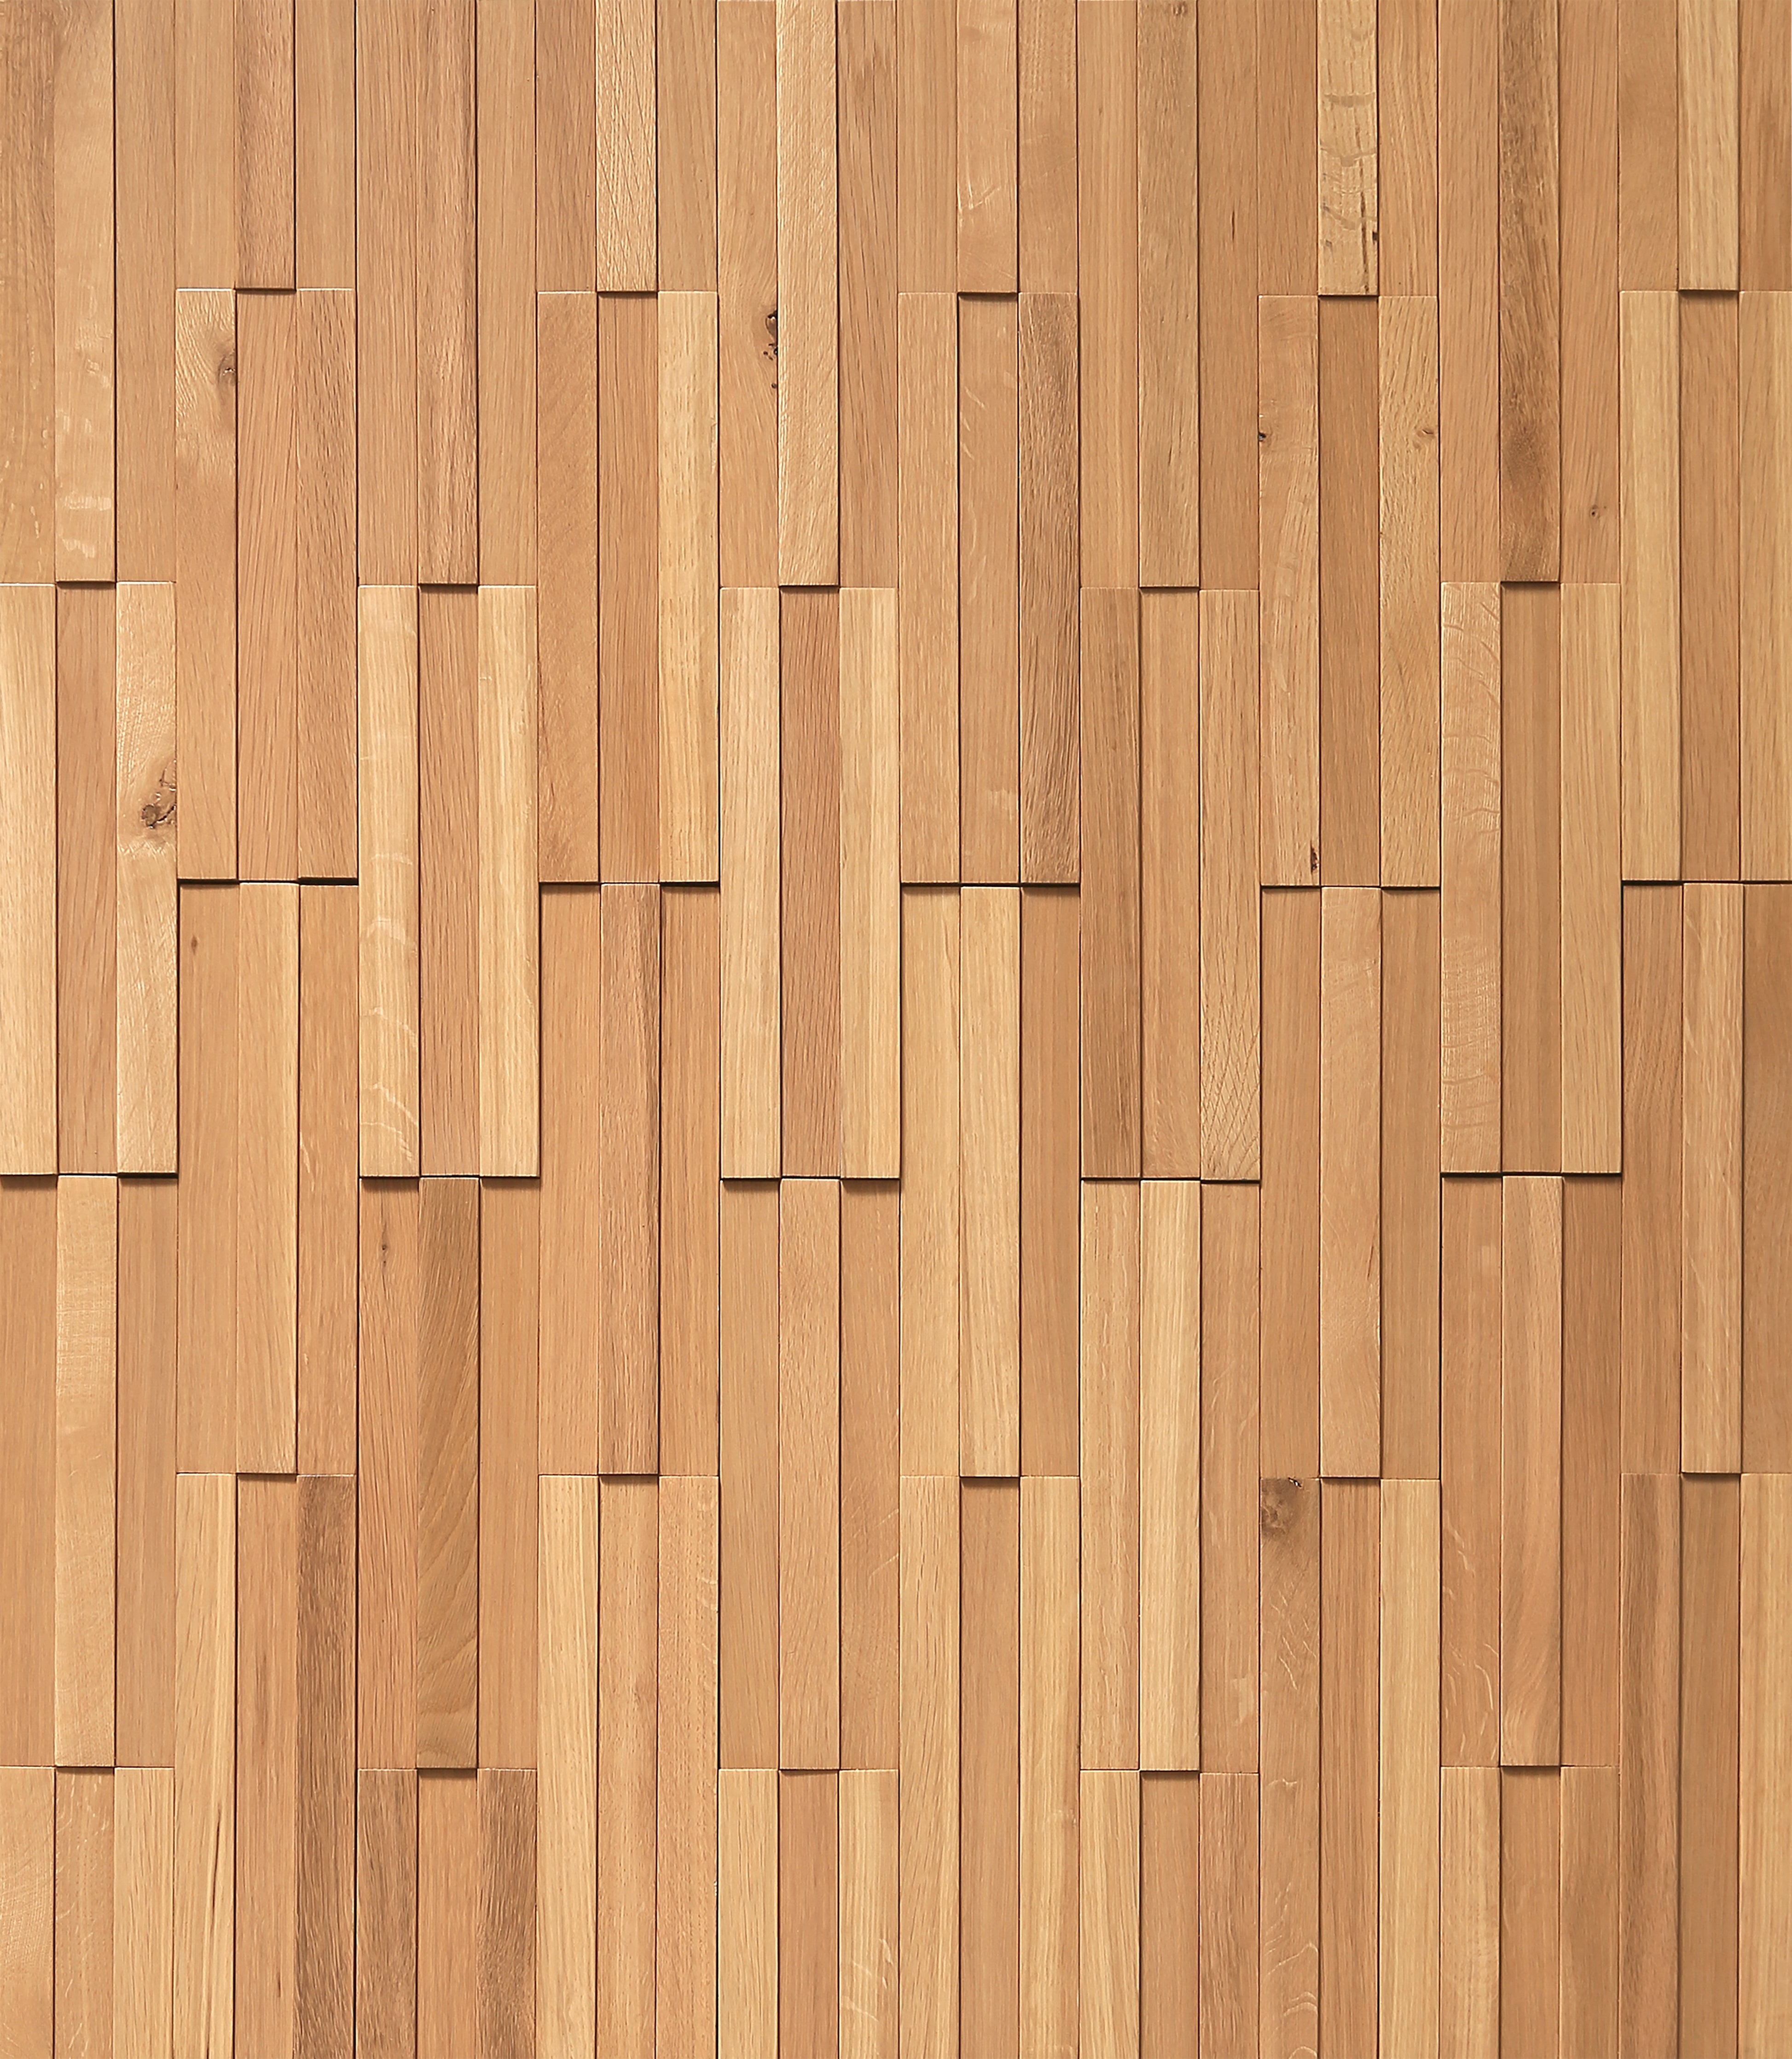 duchateau inceptiv kuadra golden oak oak three dimensional wall natural wood panel conversion varnish for interior use distributed by surface group international